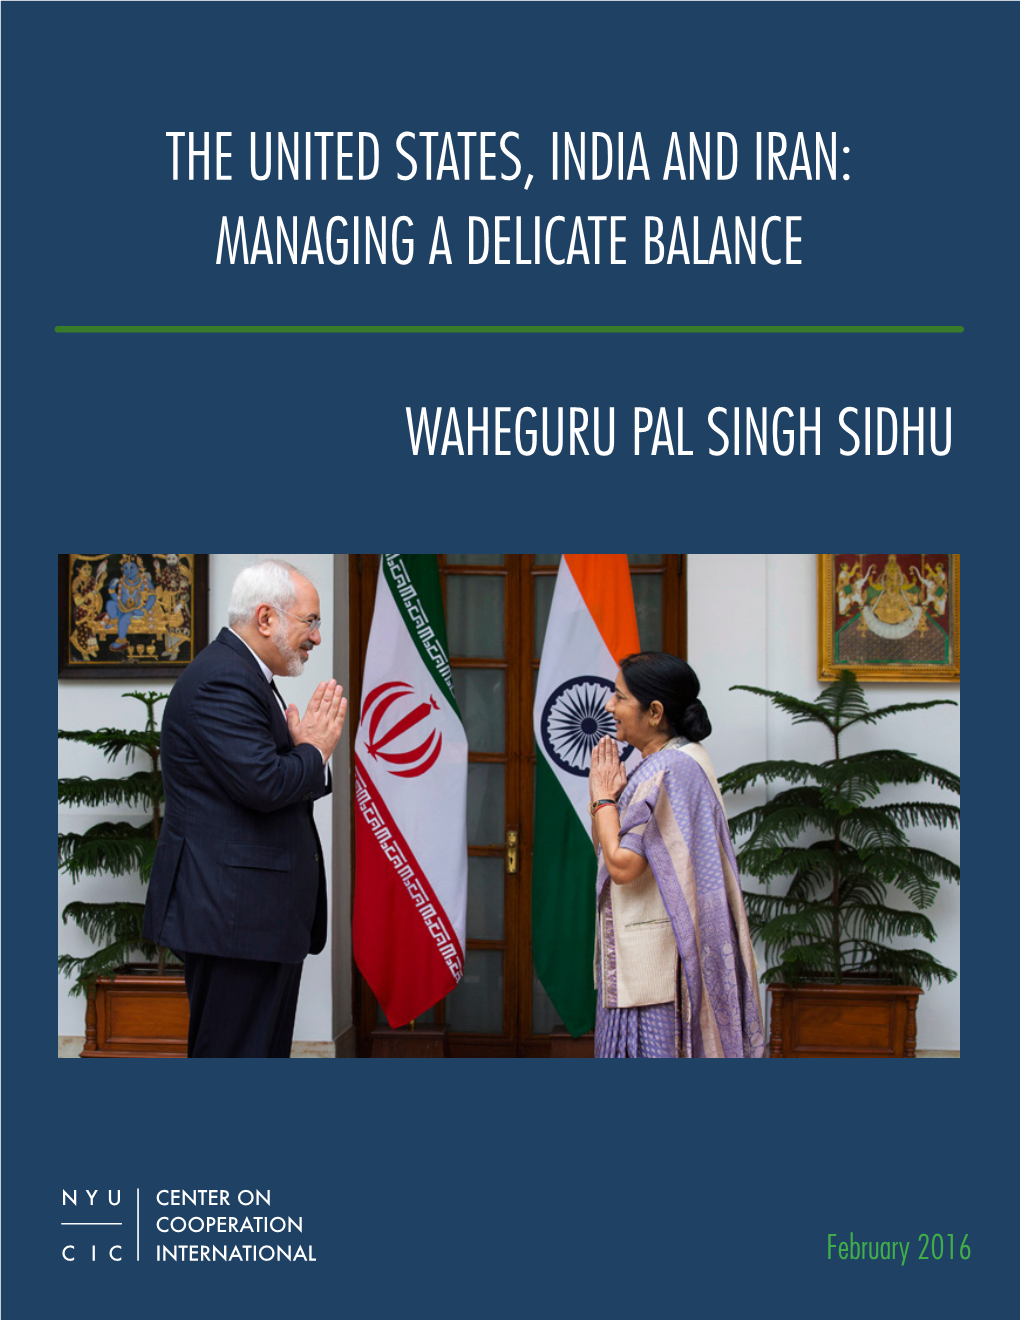 The United States, India and Iran: Managing a Delicate Balance